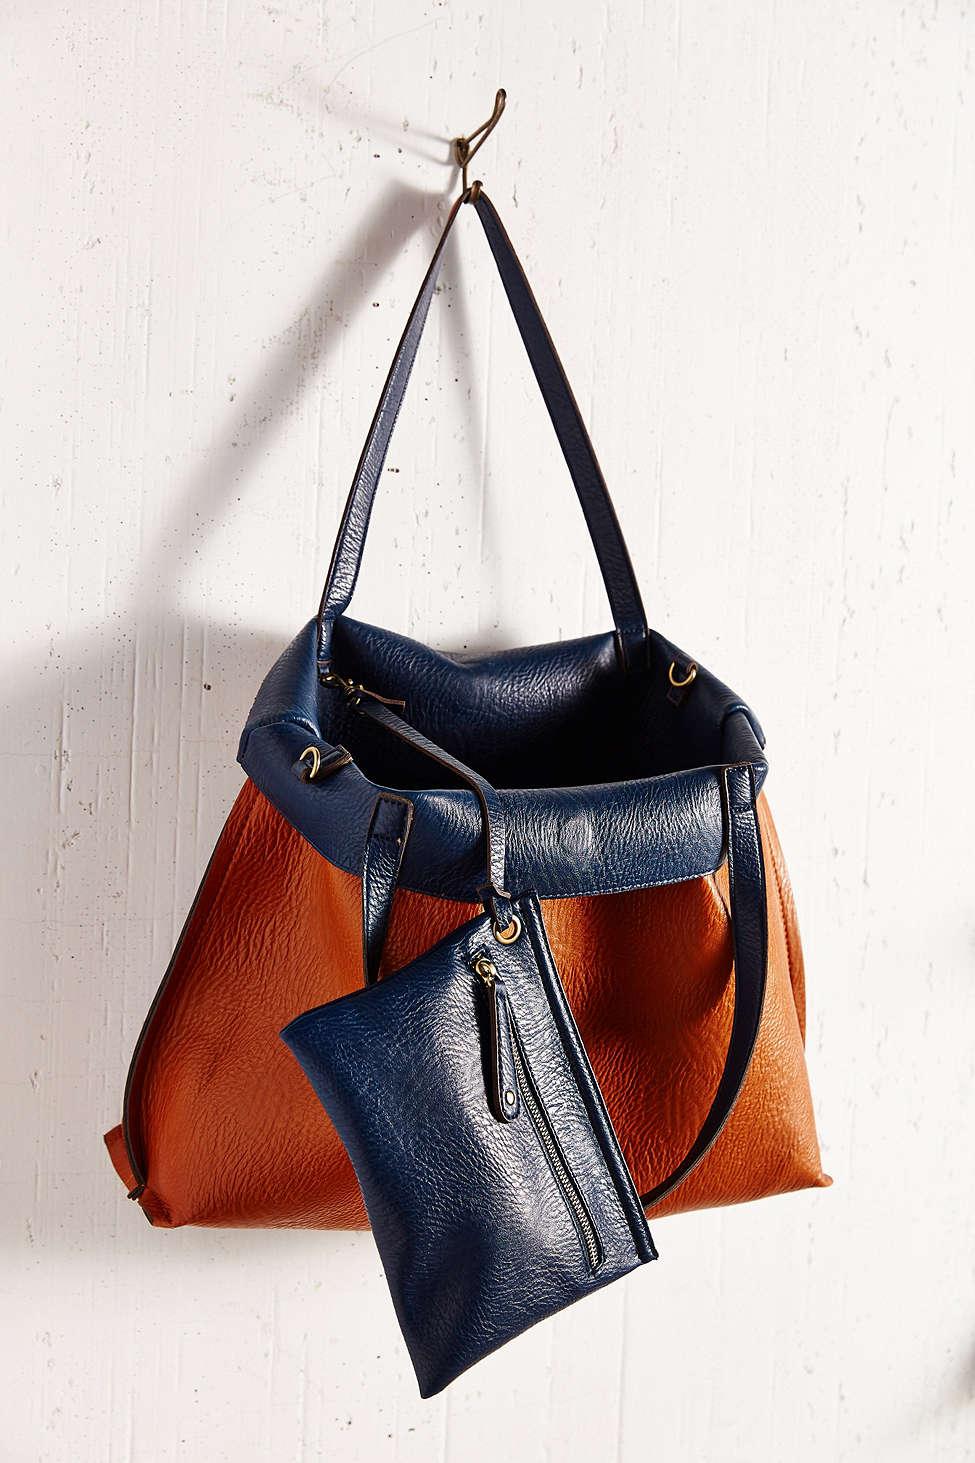 Urban Outfitters Reversible Vegan Leather Tote Bag in Brown/Navy (Blue) - Lyst